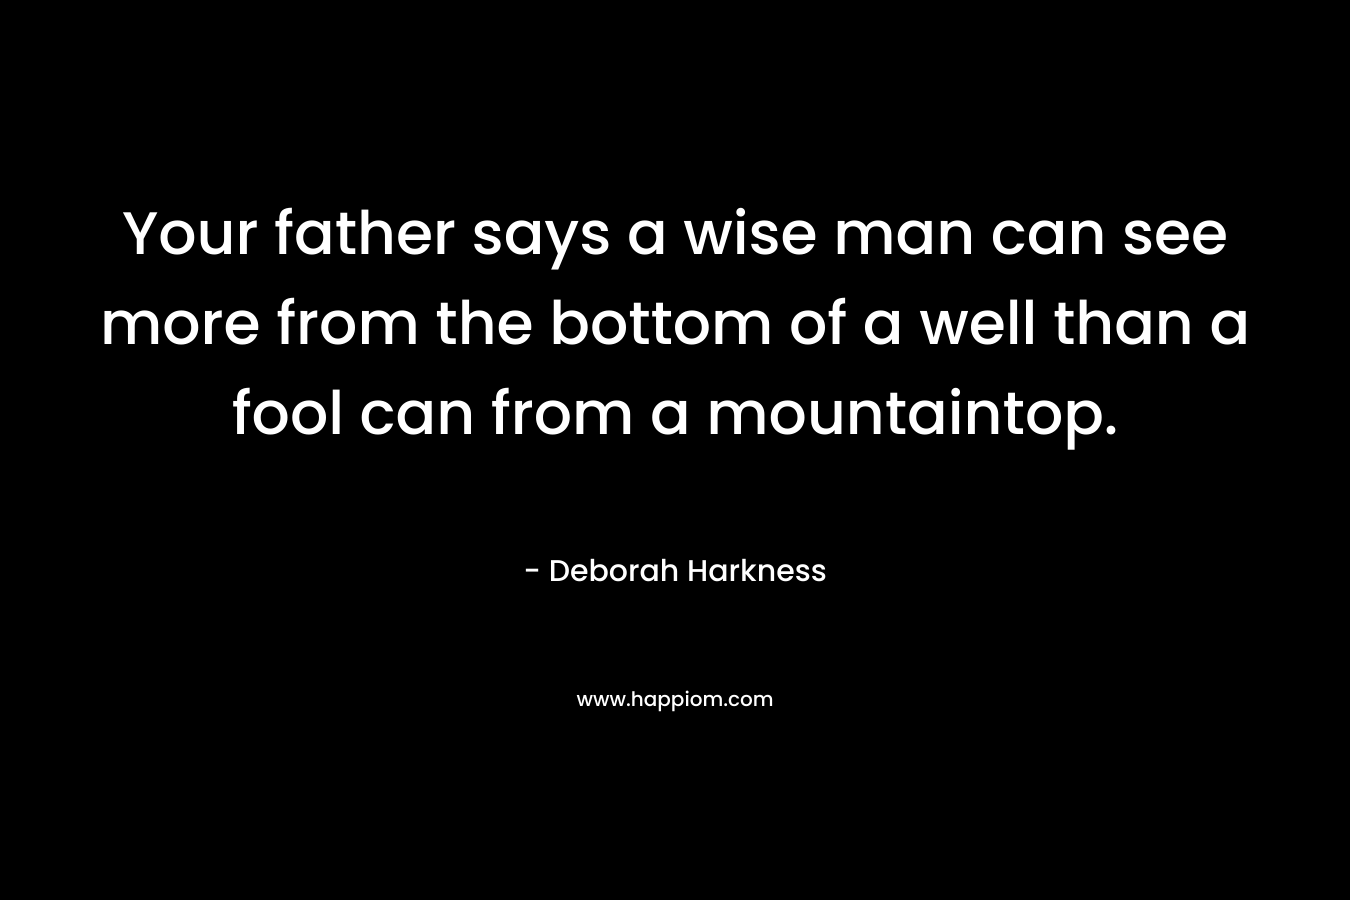 Your father says a wise man can see more from the bottom of a well than a fool can from a mountaintop. – Deborah Harkness